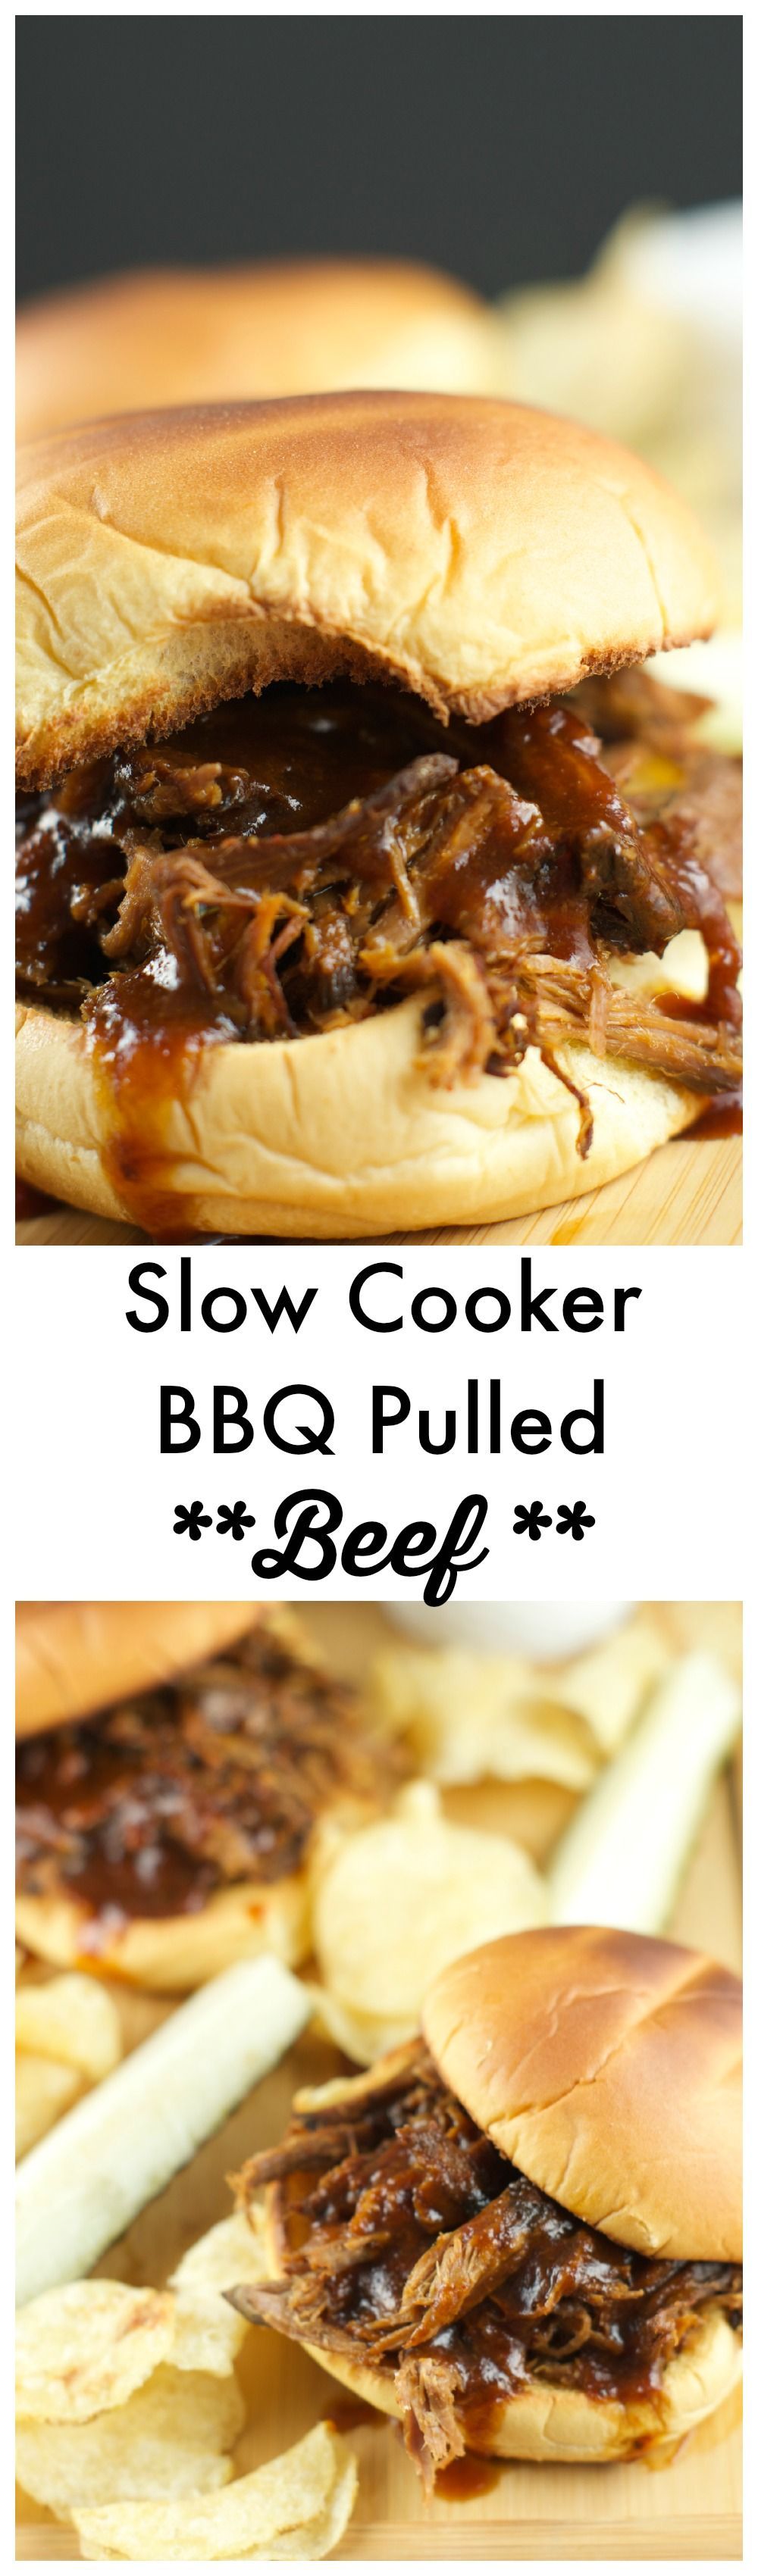 Slow Cooker Pulled BBQ Beef Sandwiches: delicious and tender beef slow cooked in a homemade BBQ sauce served on a toasted